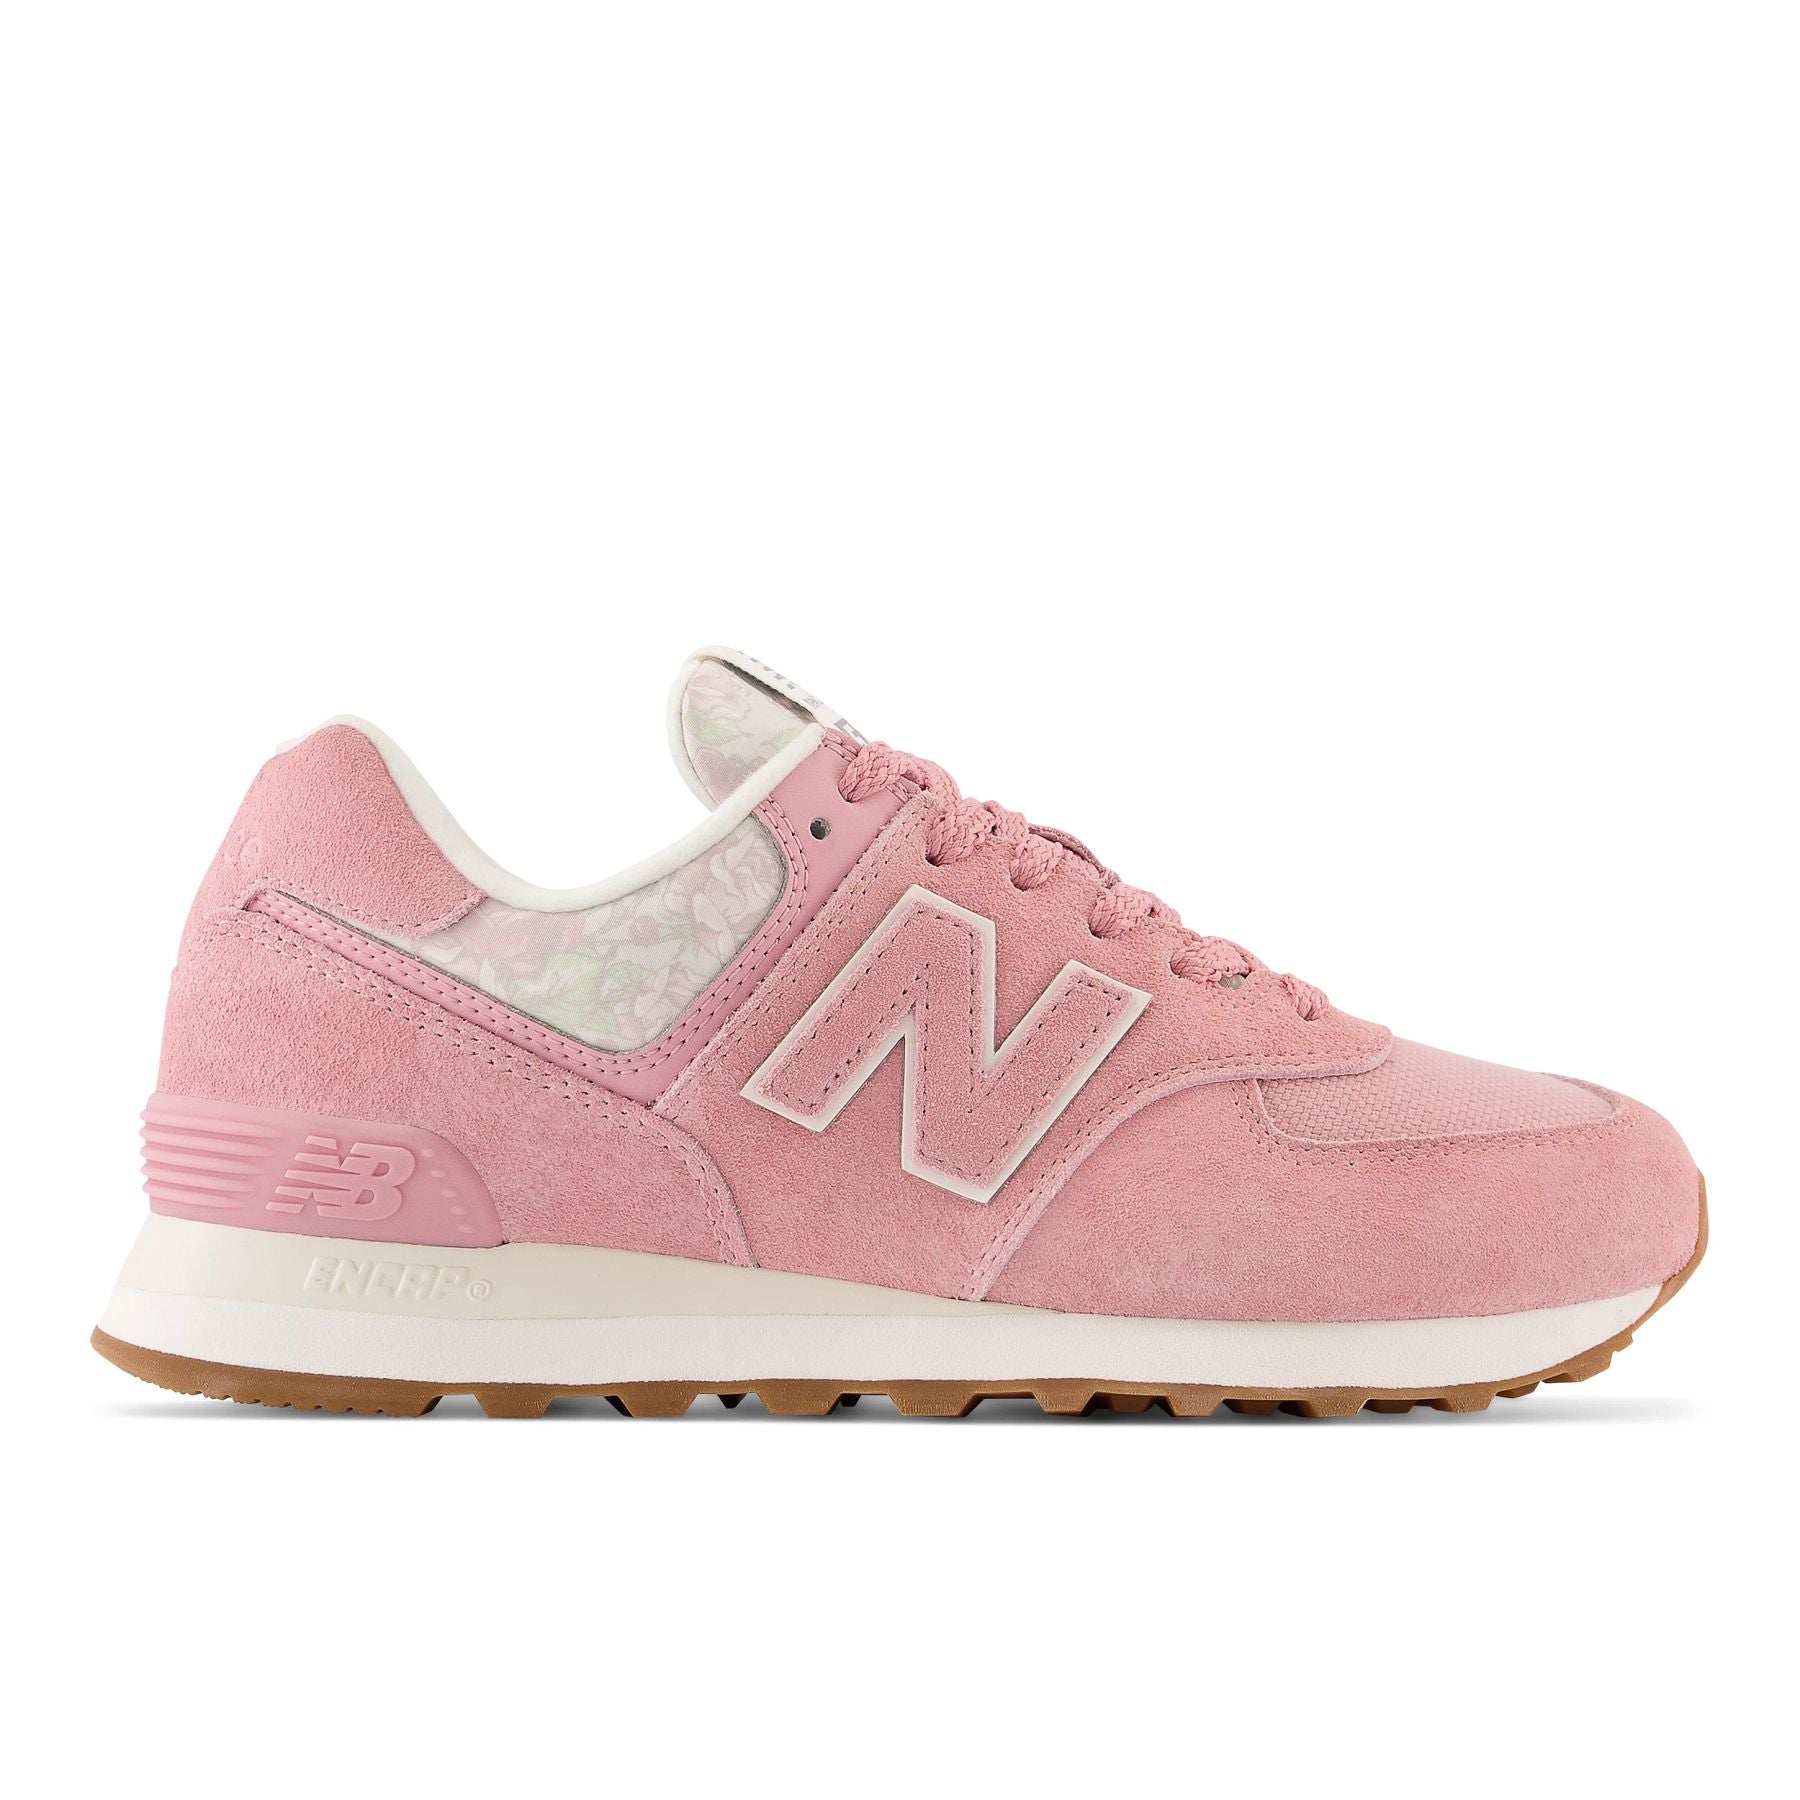 Lateral view of the Women's New Balance 574 lifestyle in the color Heavenly Rose